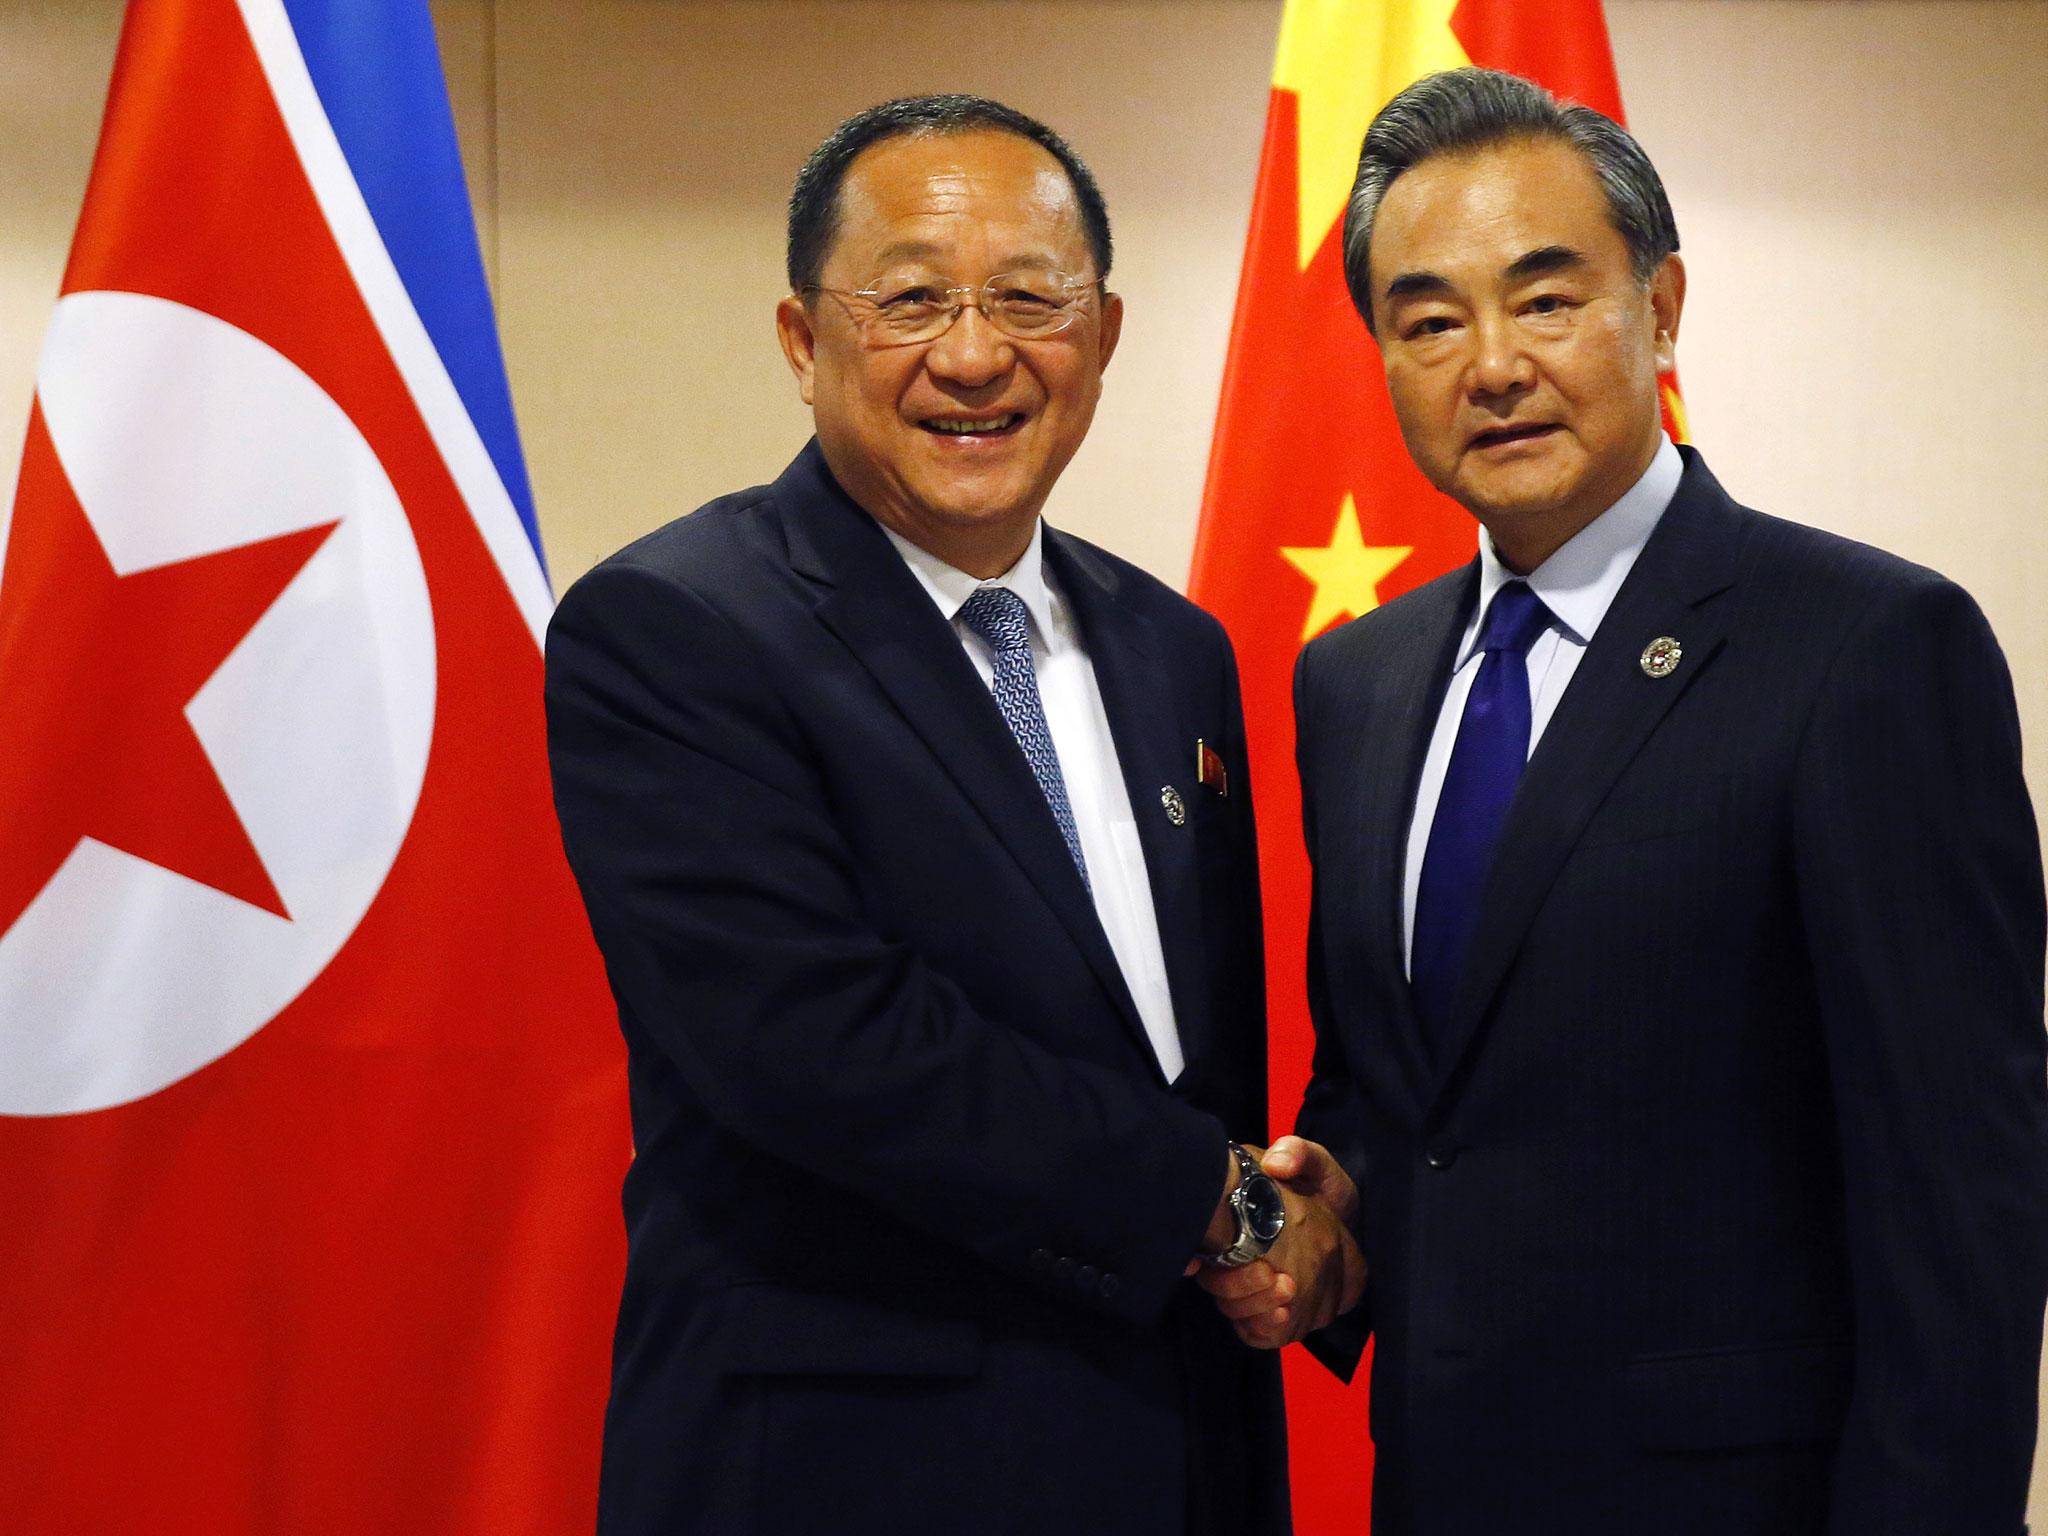 North Korean Foreign Minister Ri Yong Ho (left) poses with his Chinese counterpart Wang Yi for a photo prior to their bilateral meeting in the sideline of the 50th ASEAN Foreign Ministers' Meeting and its Dialogue Partners, in Pasay city, south Manila, Philippines